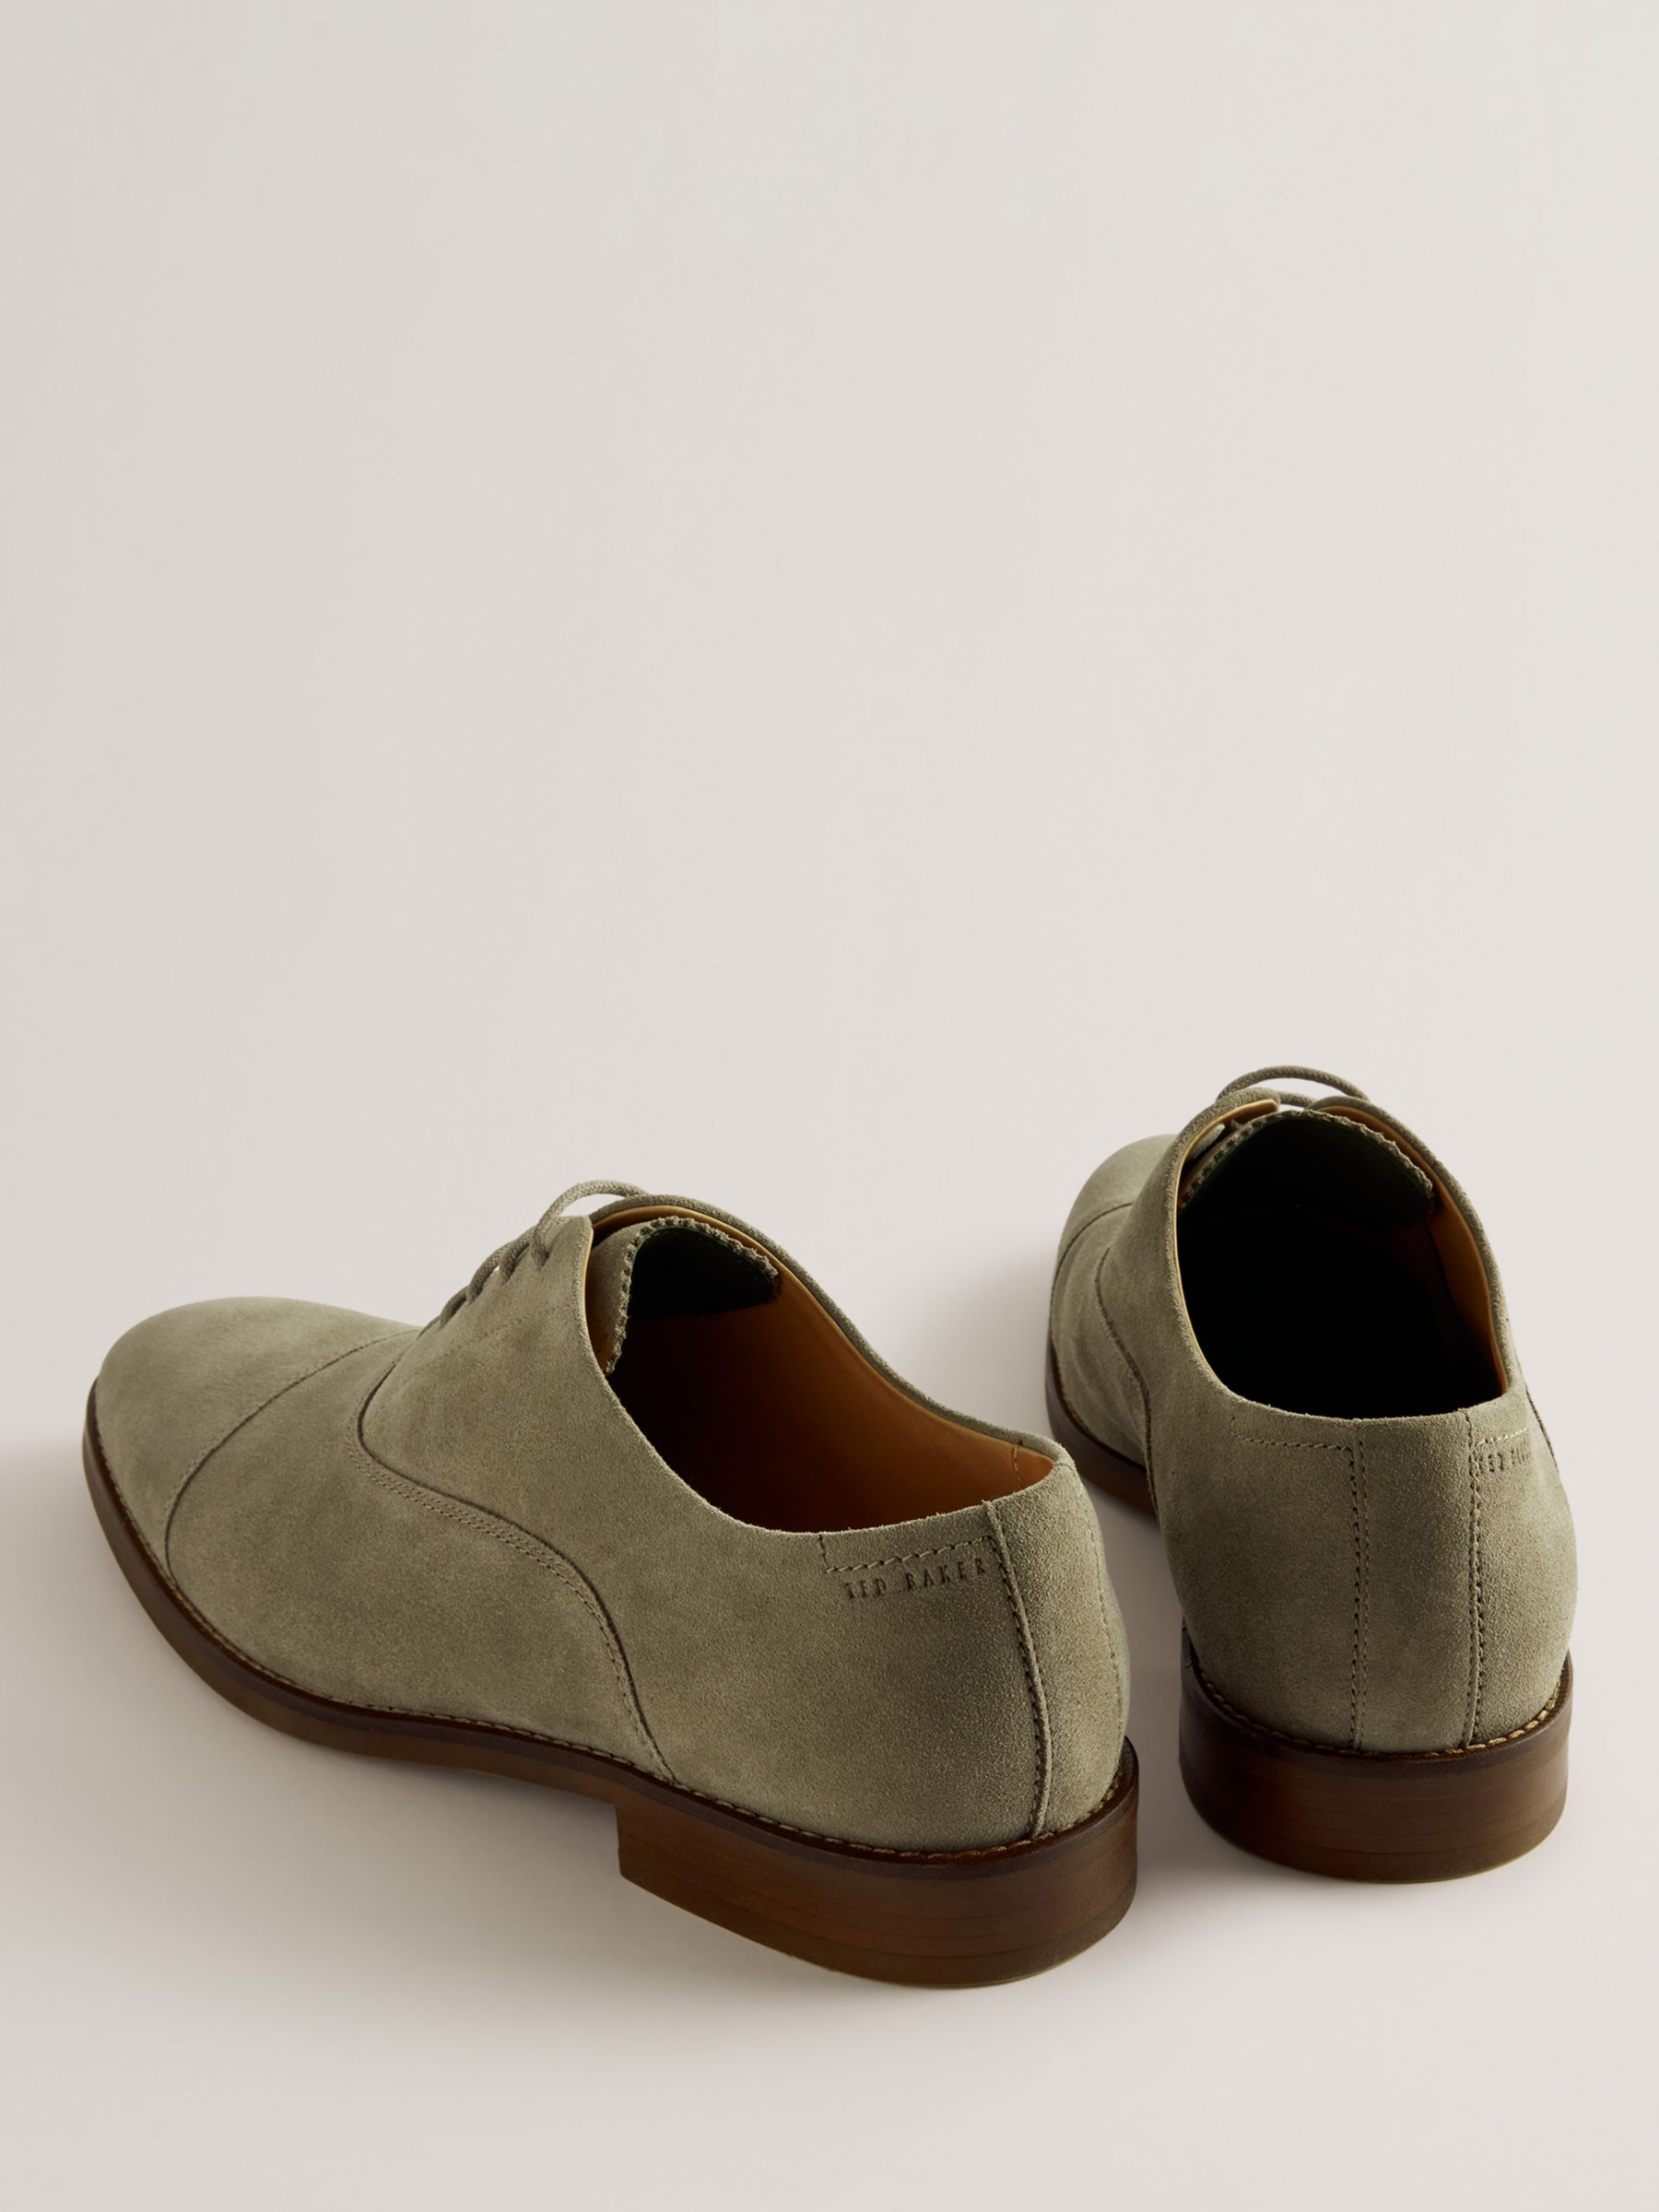 Buy Ted Baker Oxfoord Suede Oxford Shoes, Khaki Online at johnlewis.com